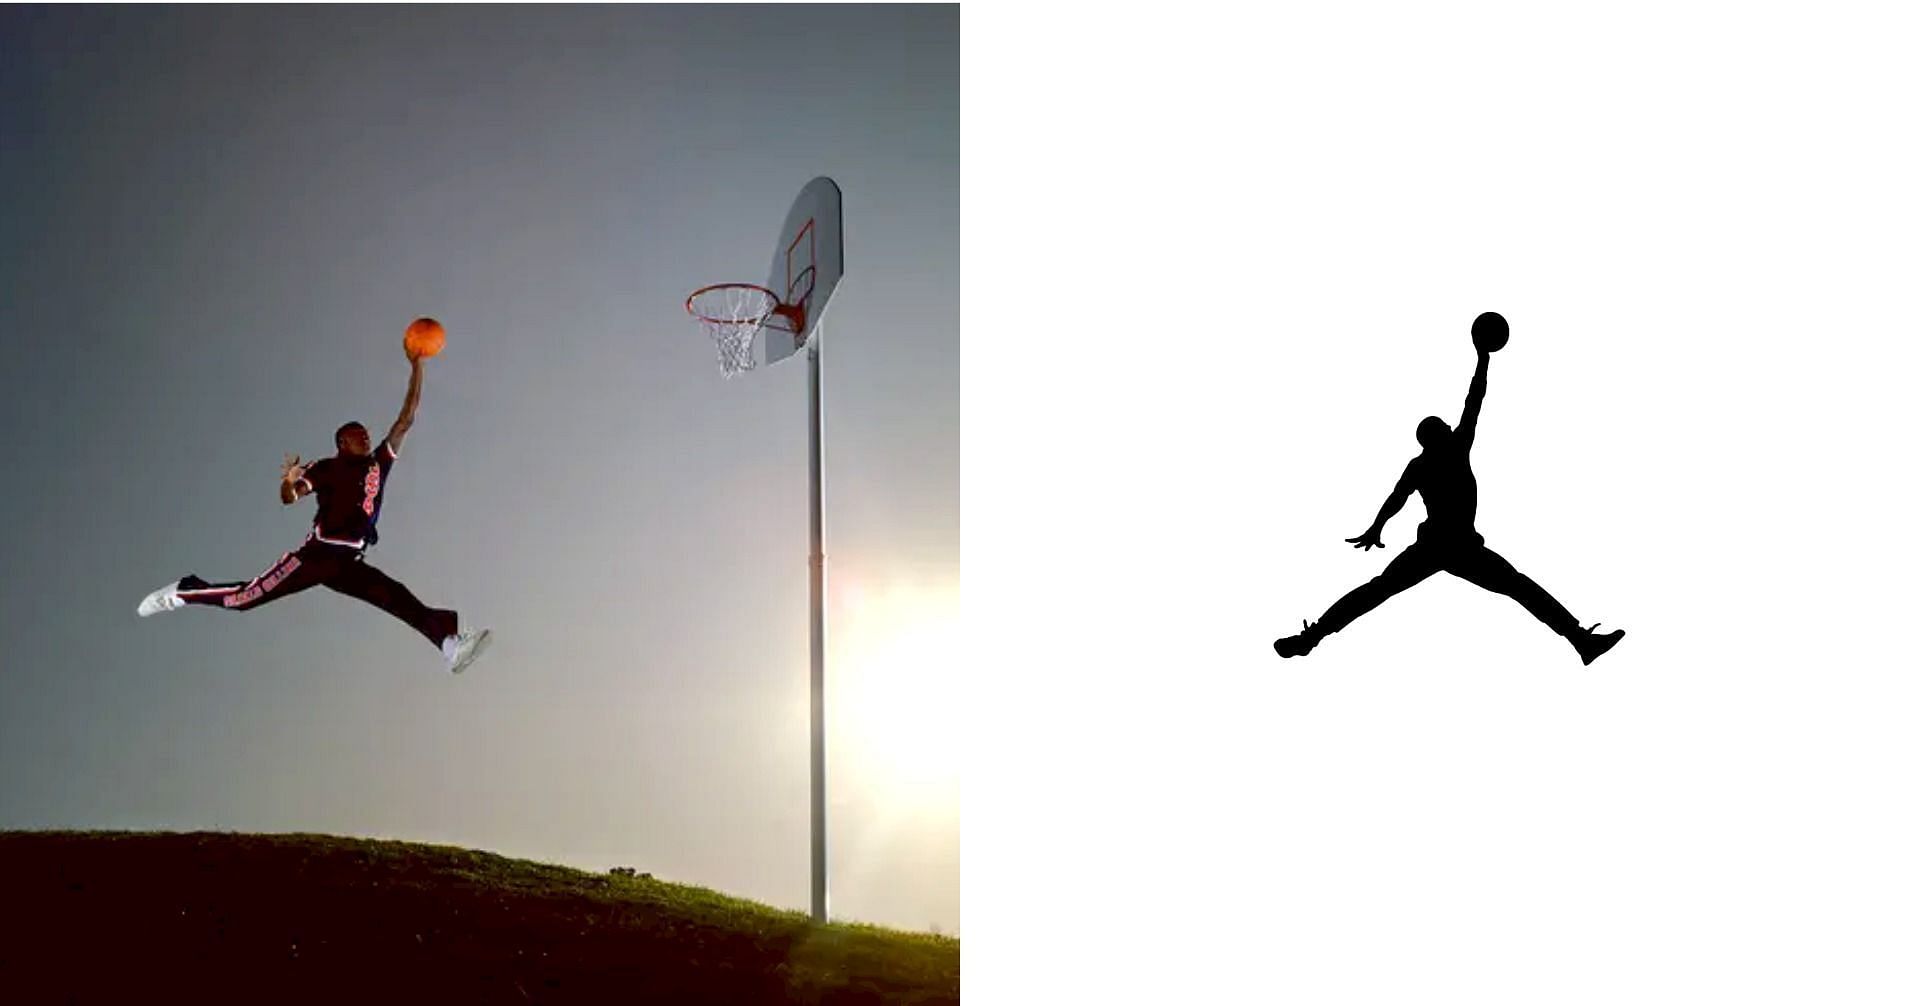 Jumpman Logo once landed Michael Jordan and Nike in court amid allegations of copyright infringement after billions earned